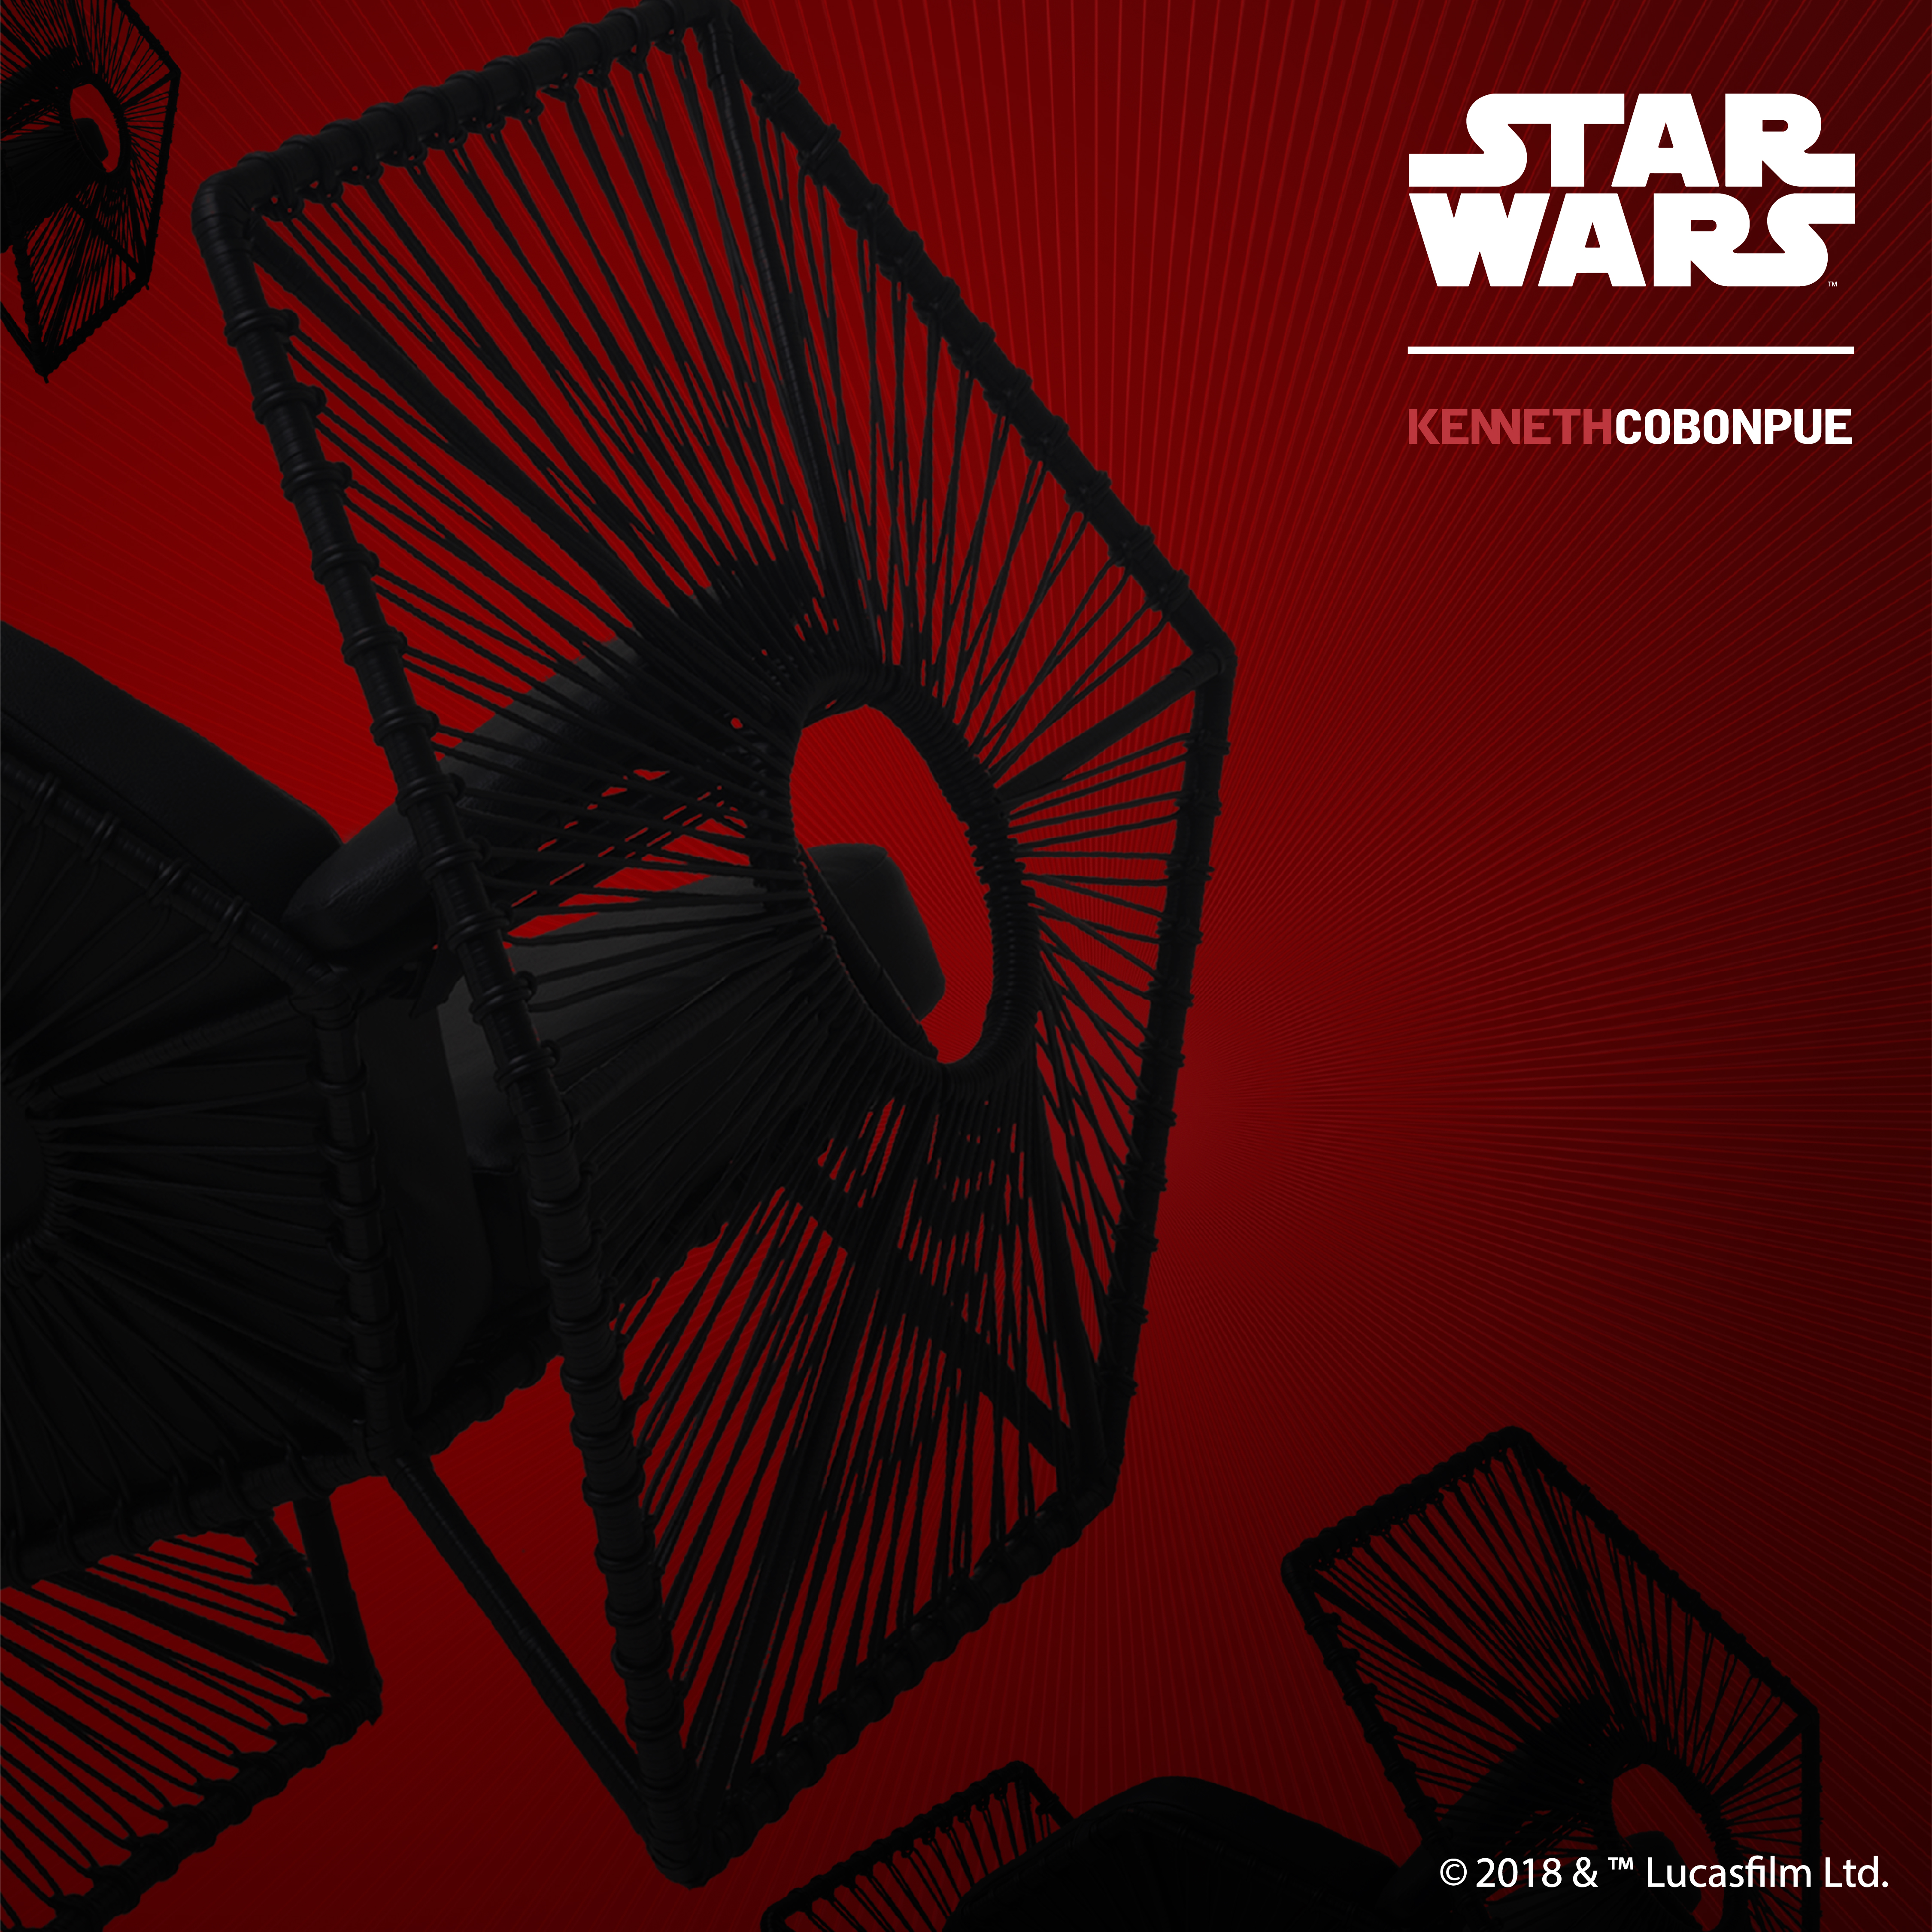 Star Wars fans, this Kenneth Cobonpue collection is for you!